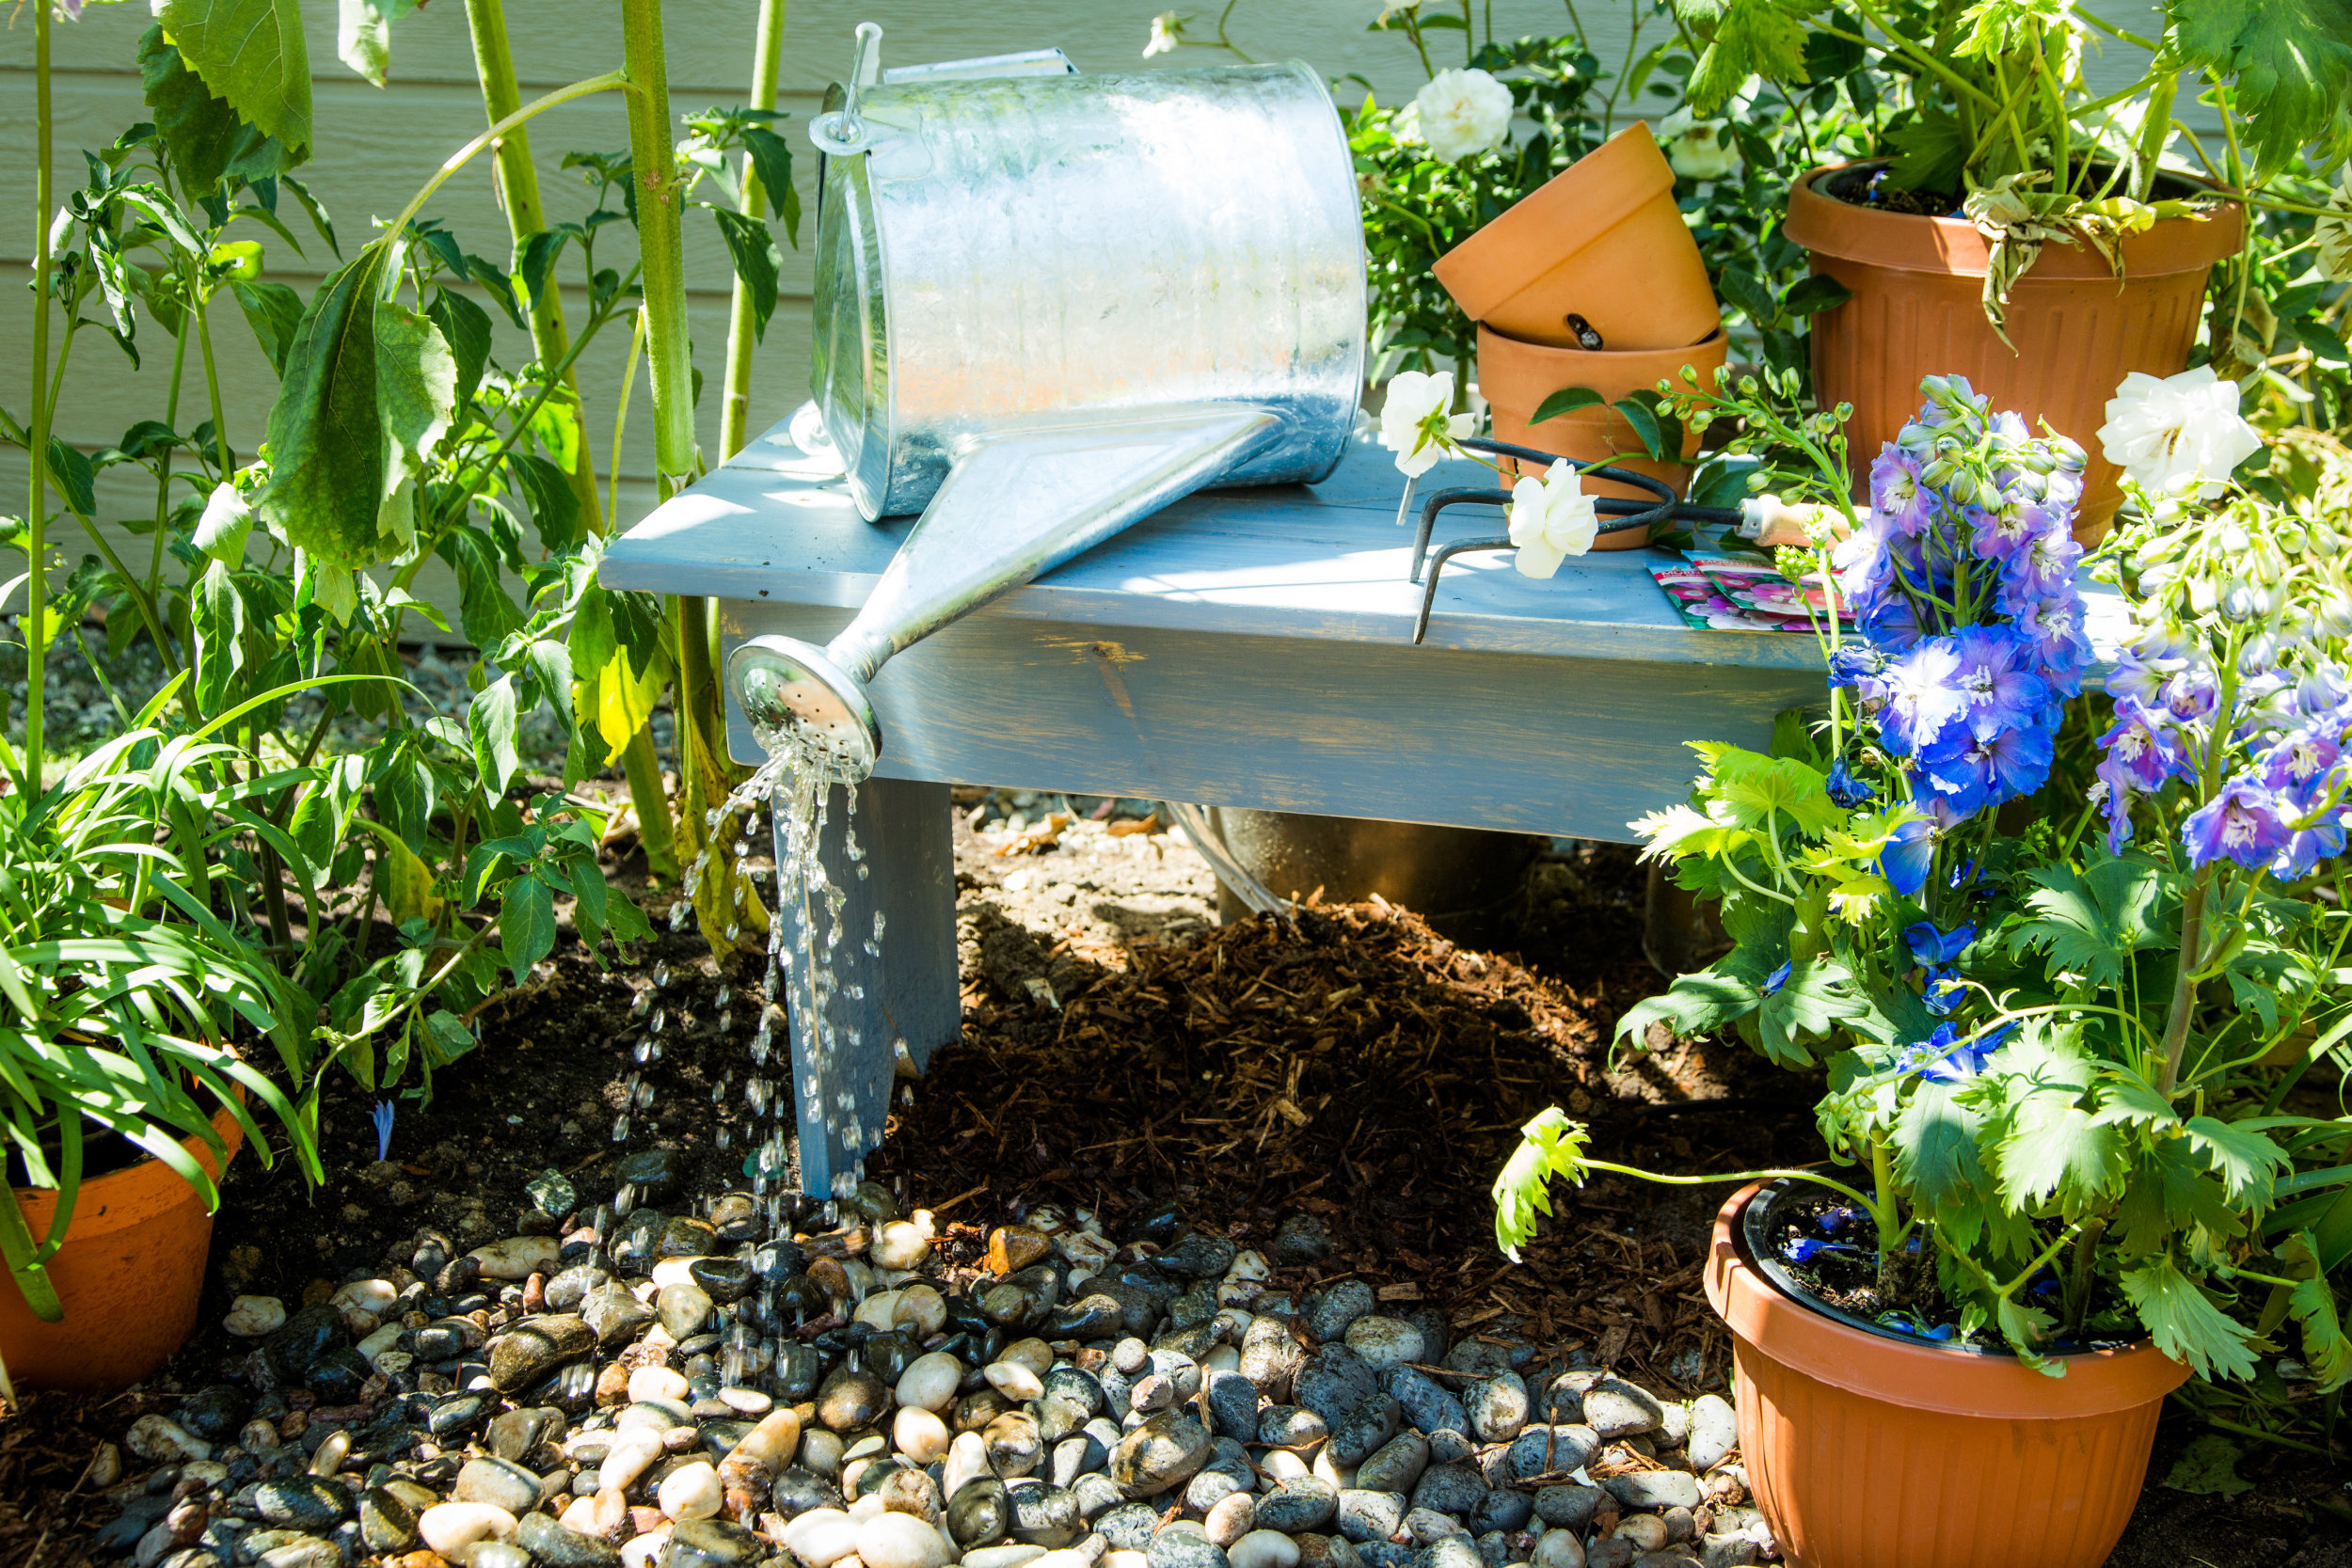 How To - Home & Family: DIY Watering Can Fountain | Hallmark Channel